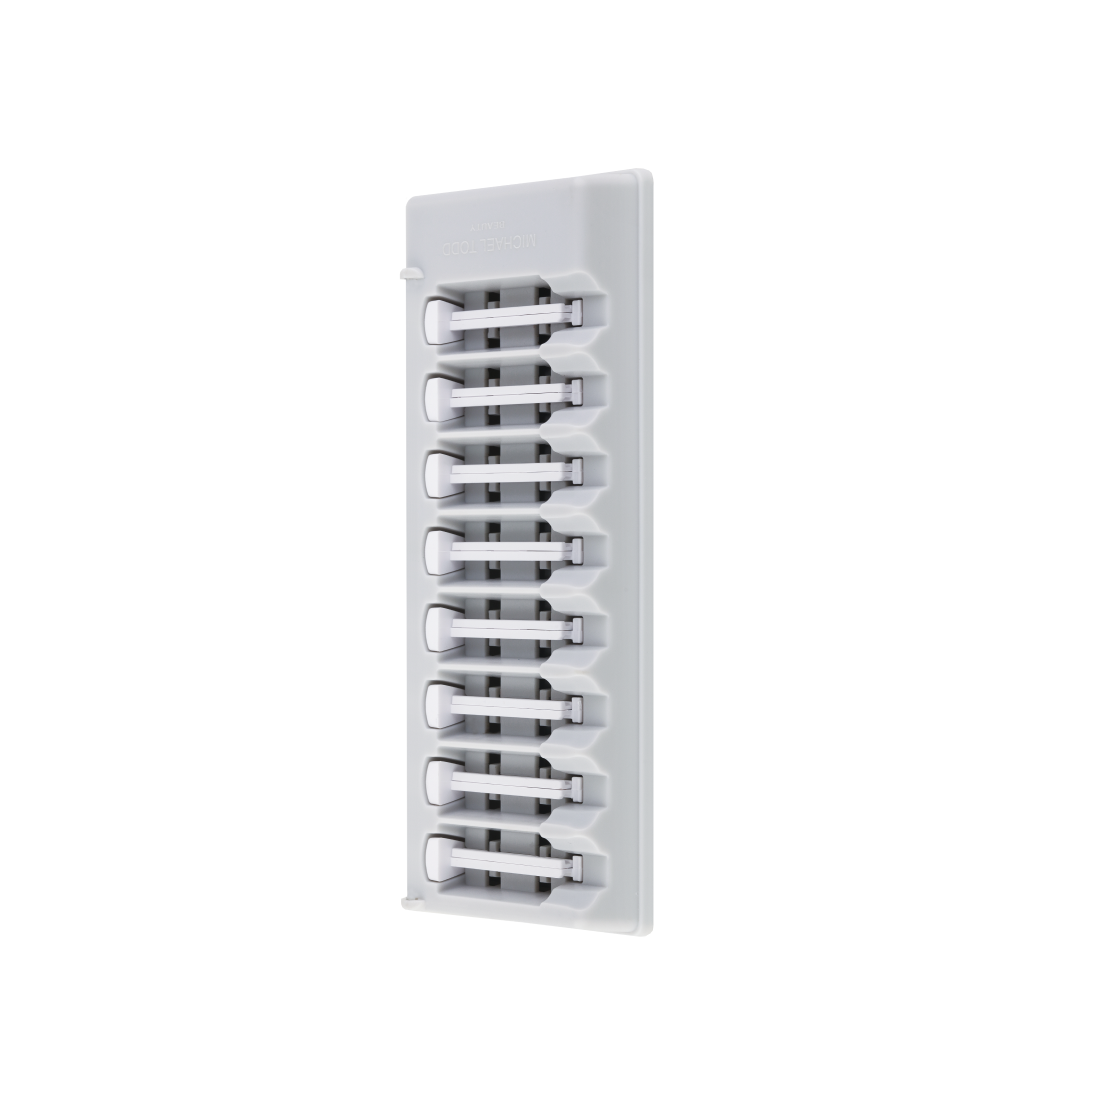 A white rectangular plastic panel with ten evenly spaced clips in two columns, perfect for organizing cables or similar items, and designed with medical grade Sonicsmooth Refill Tips by Michael Todd Beauty for secure home use. 2 Month Supply